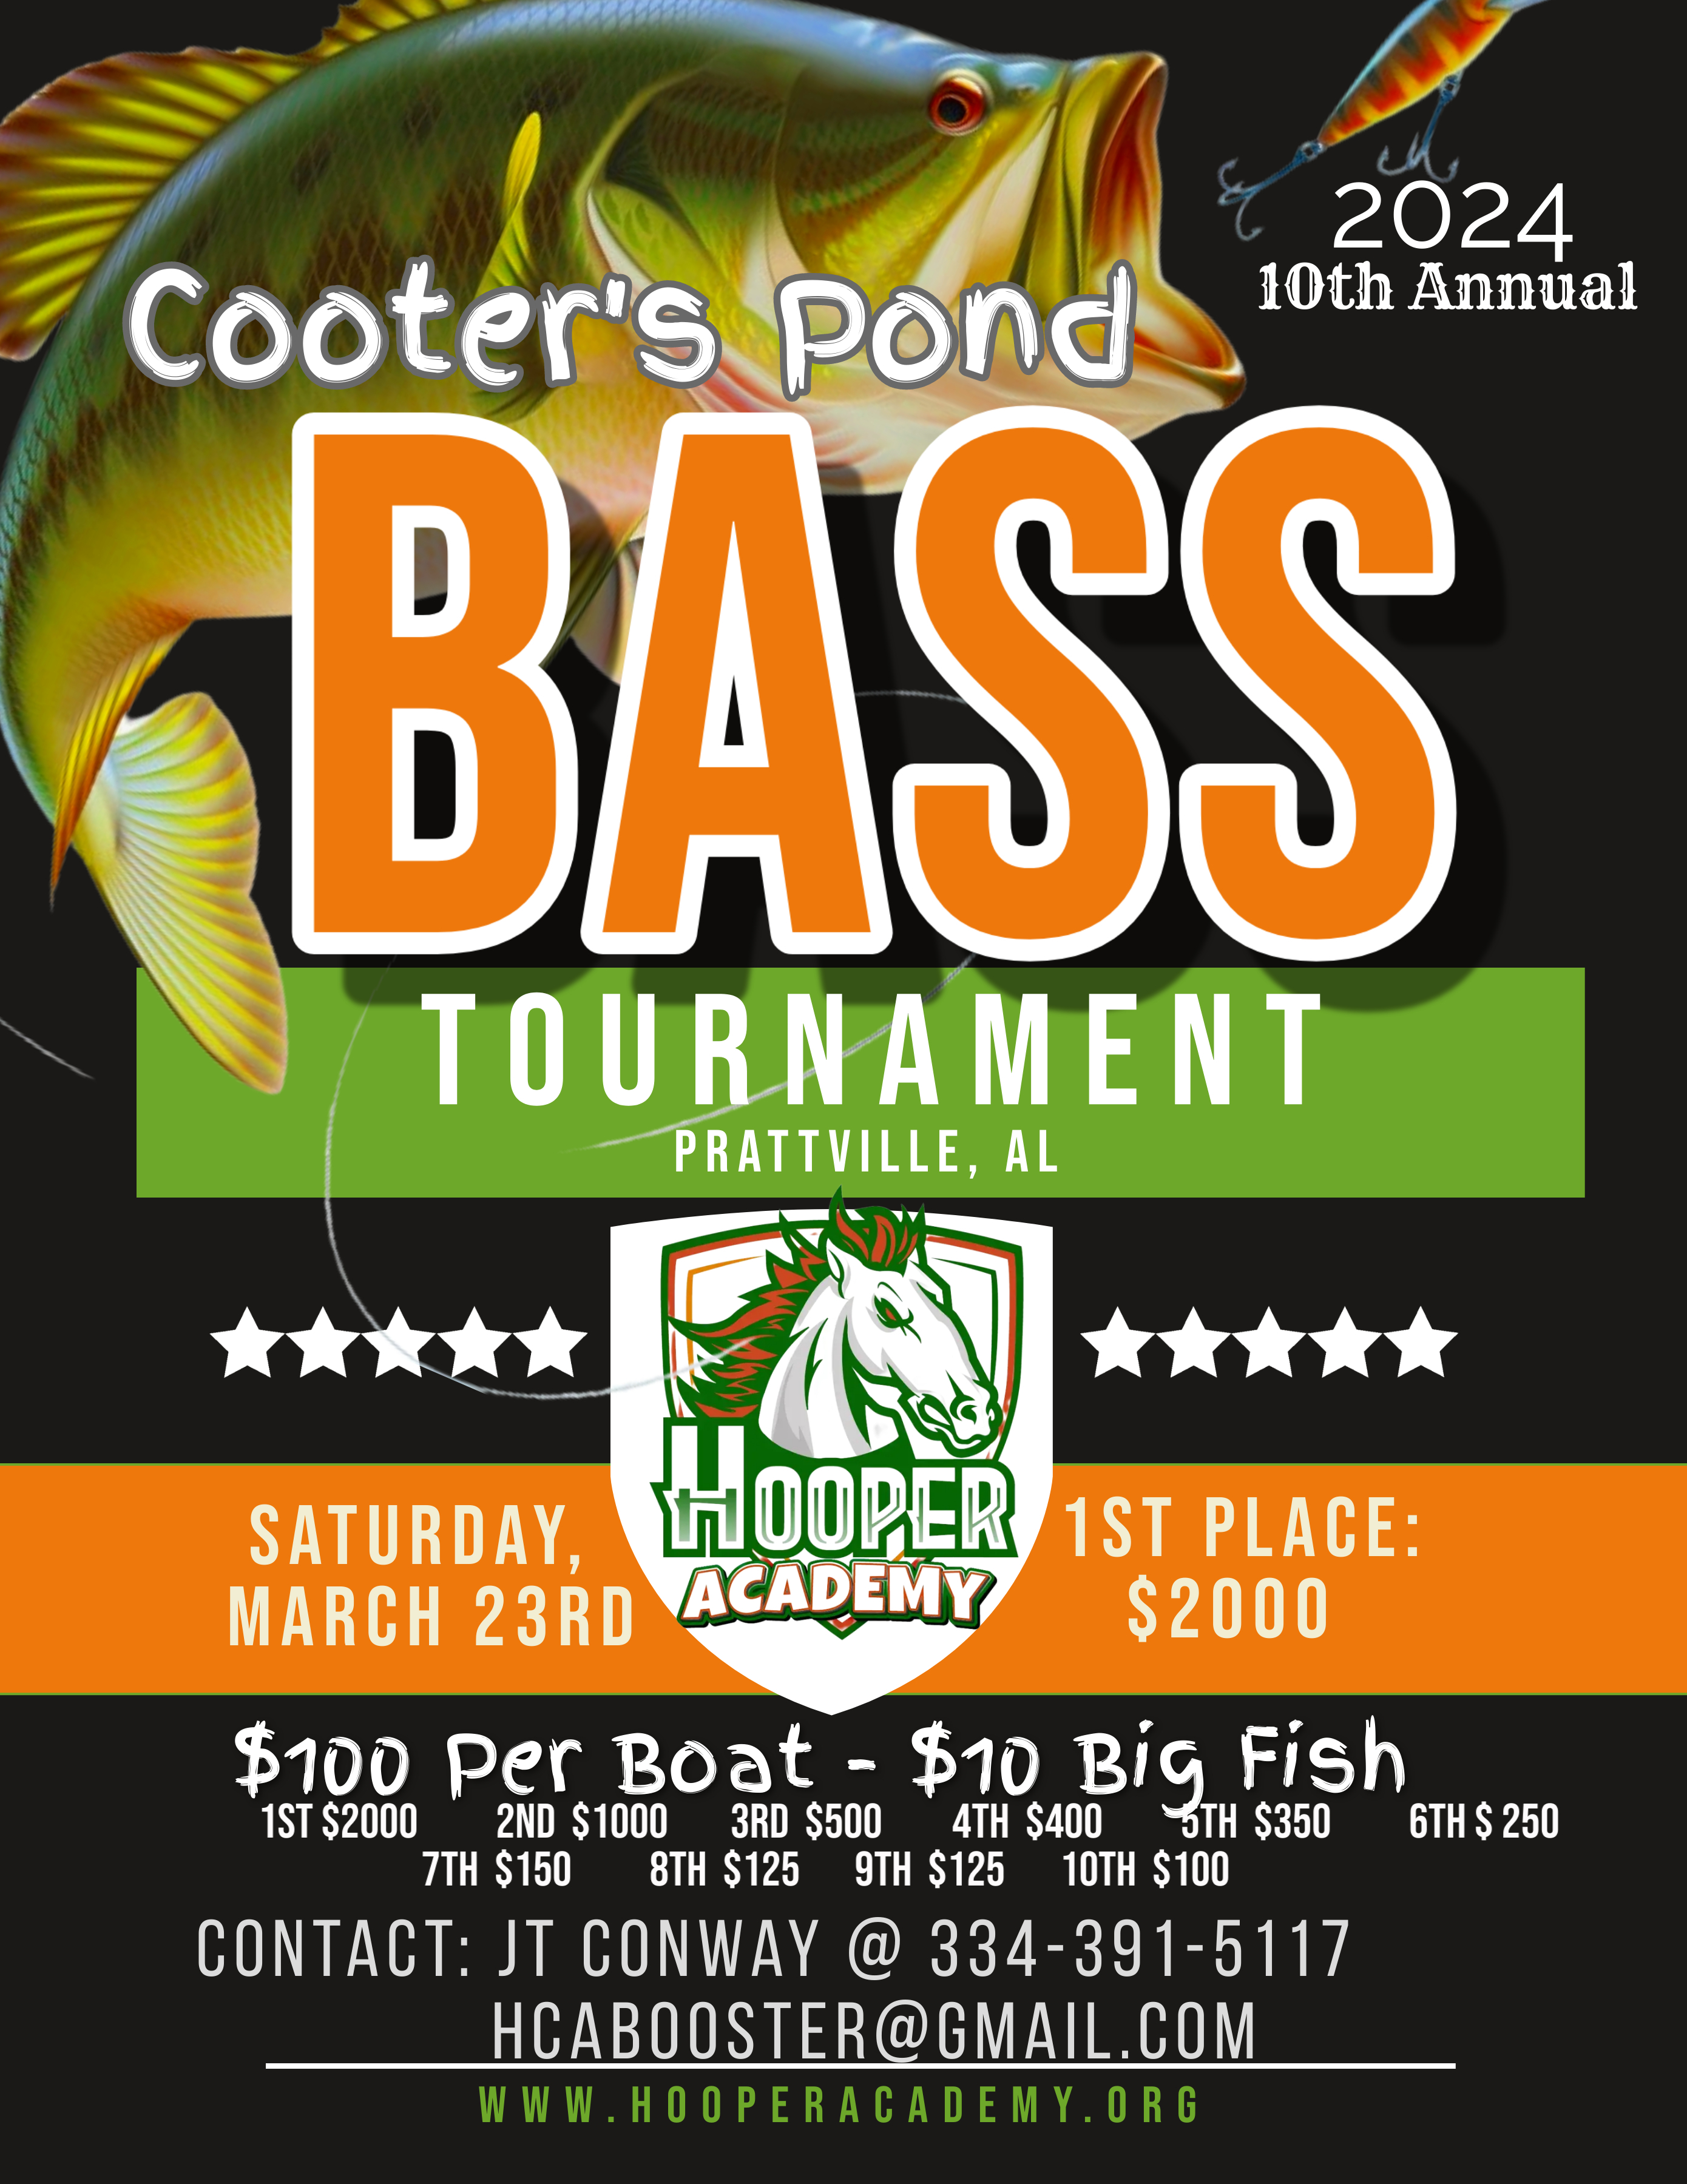 Join us for Hooper's 10th Annual Bass Tournament!